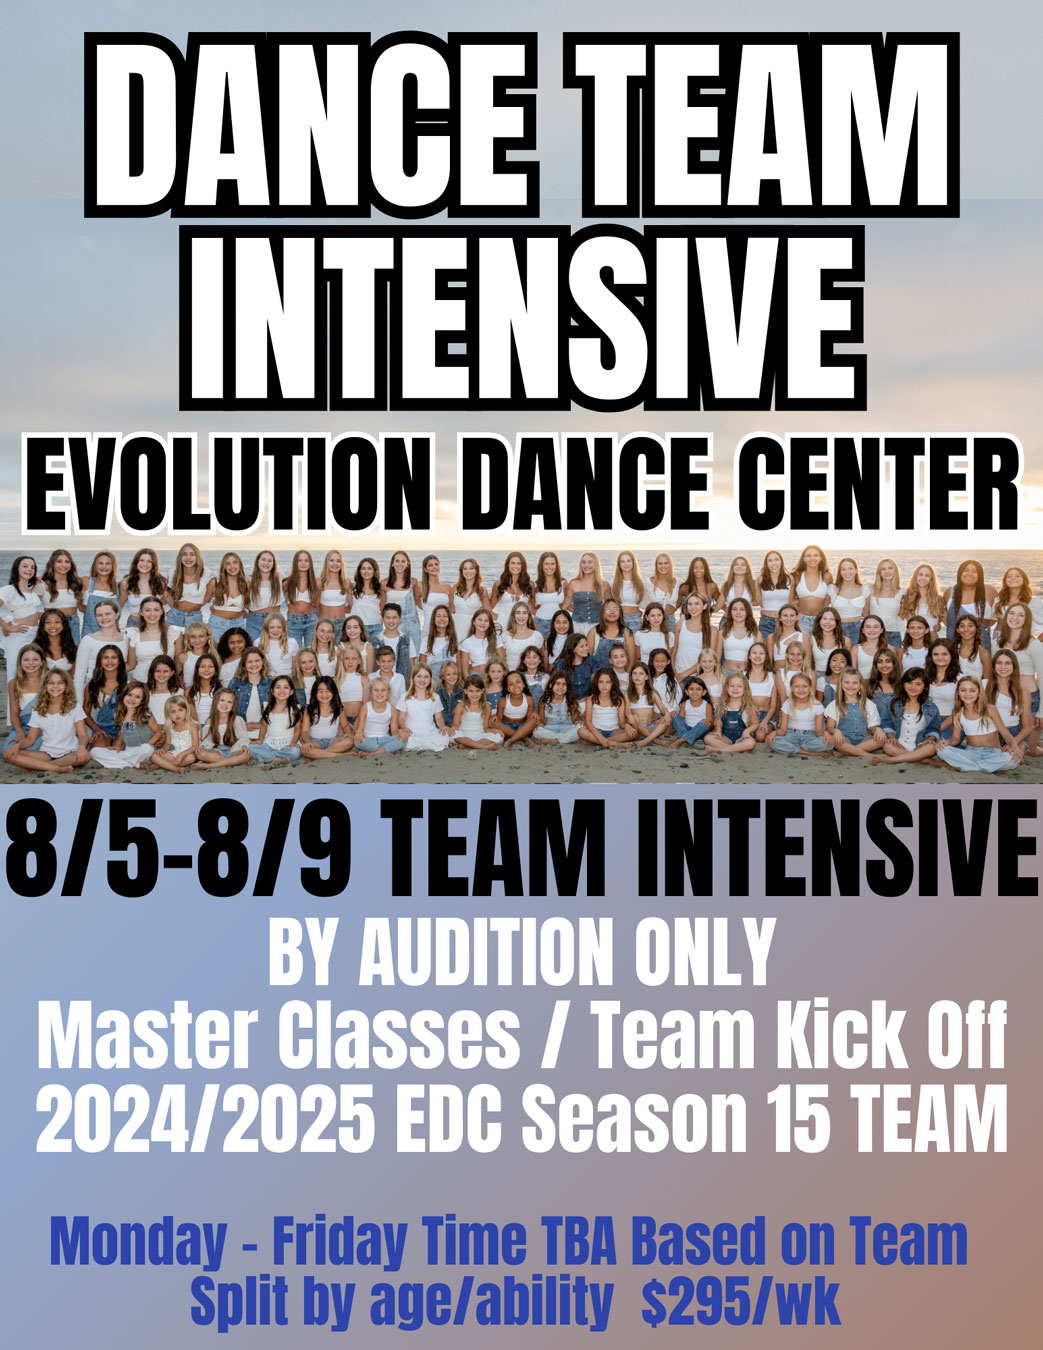 Dance Team Intensive dance camp flyer with teen dancers featured on the flyer.